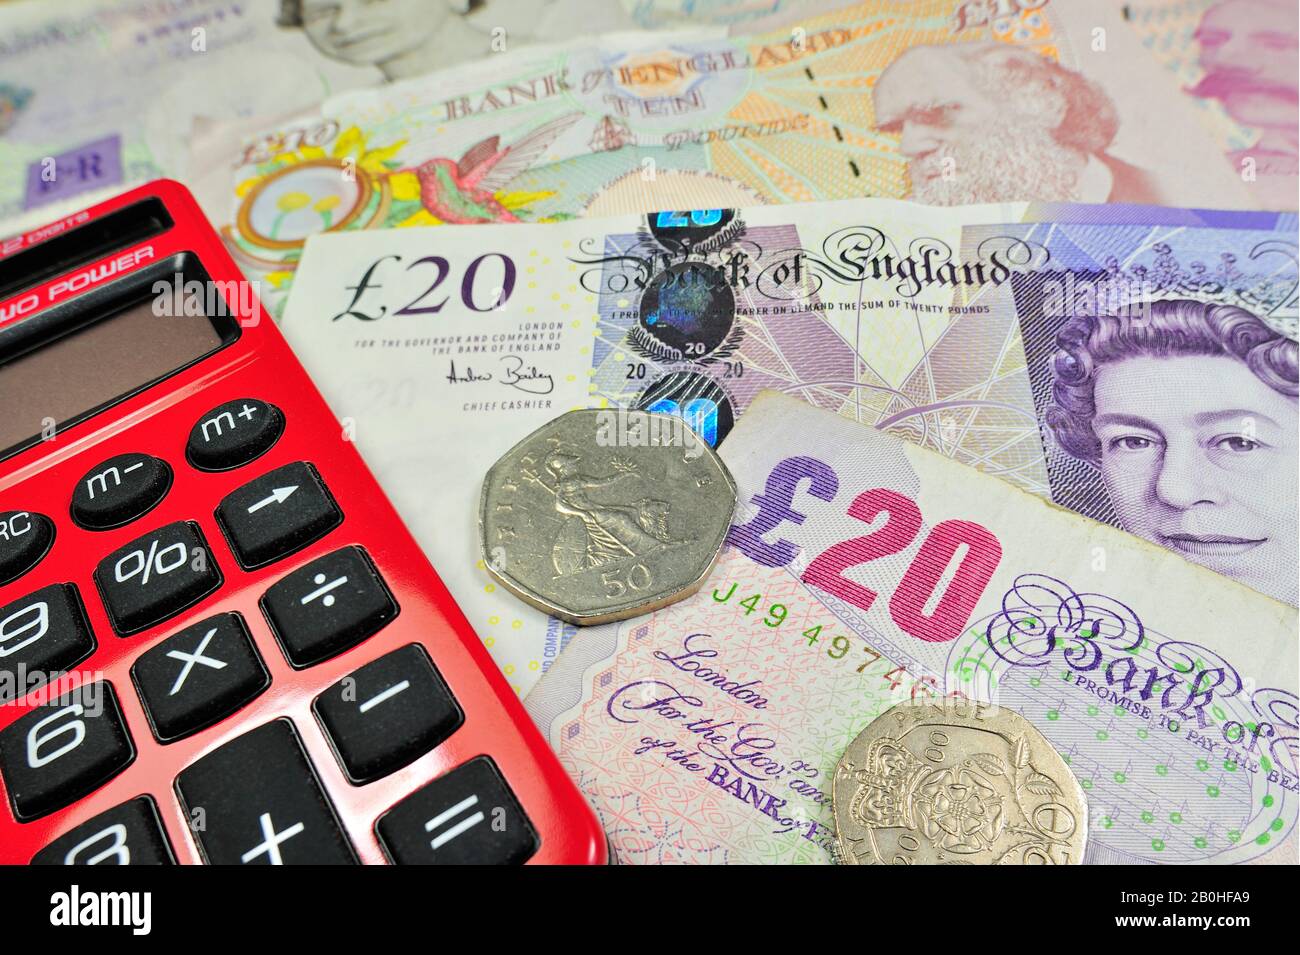 English banknotes in pound sterling and red pocket calculator Stock Photo